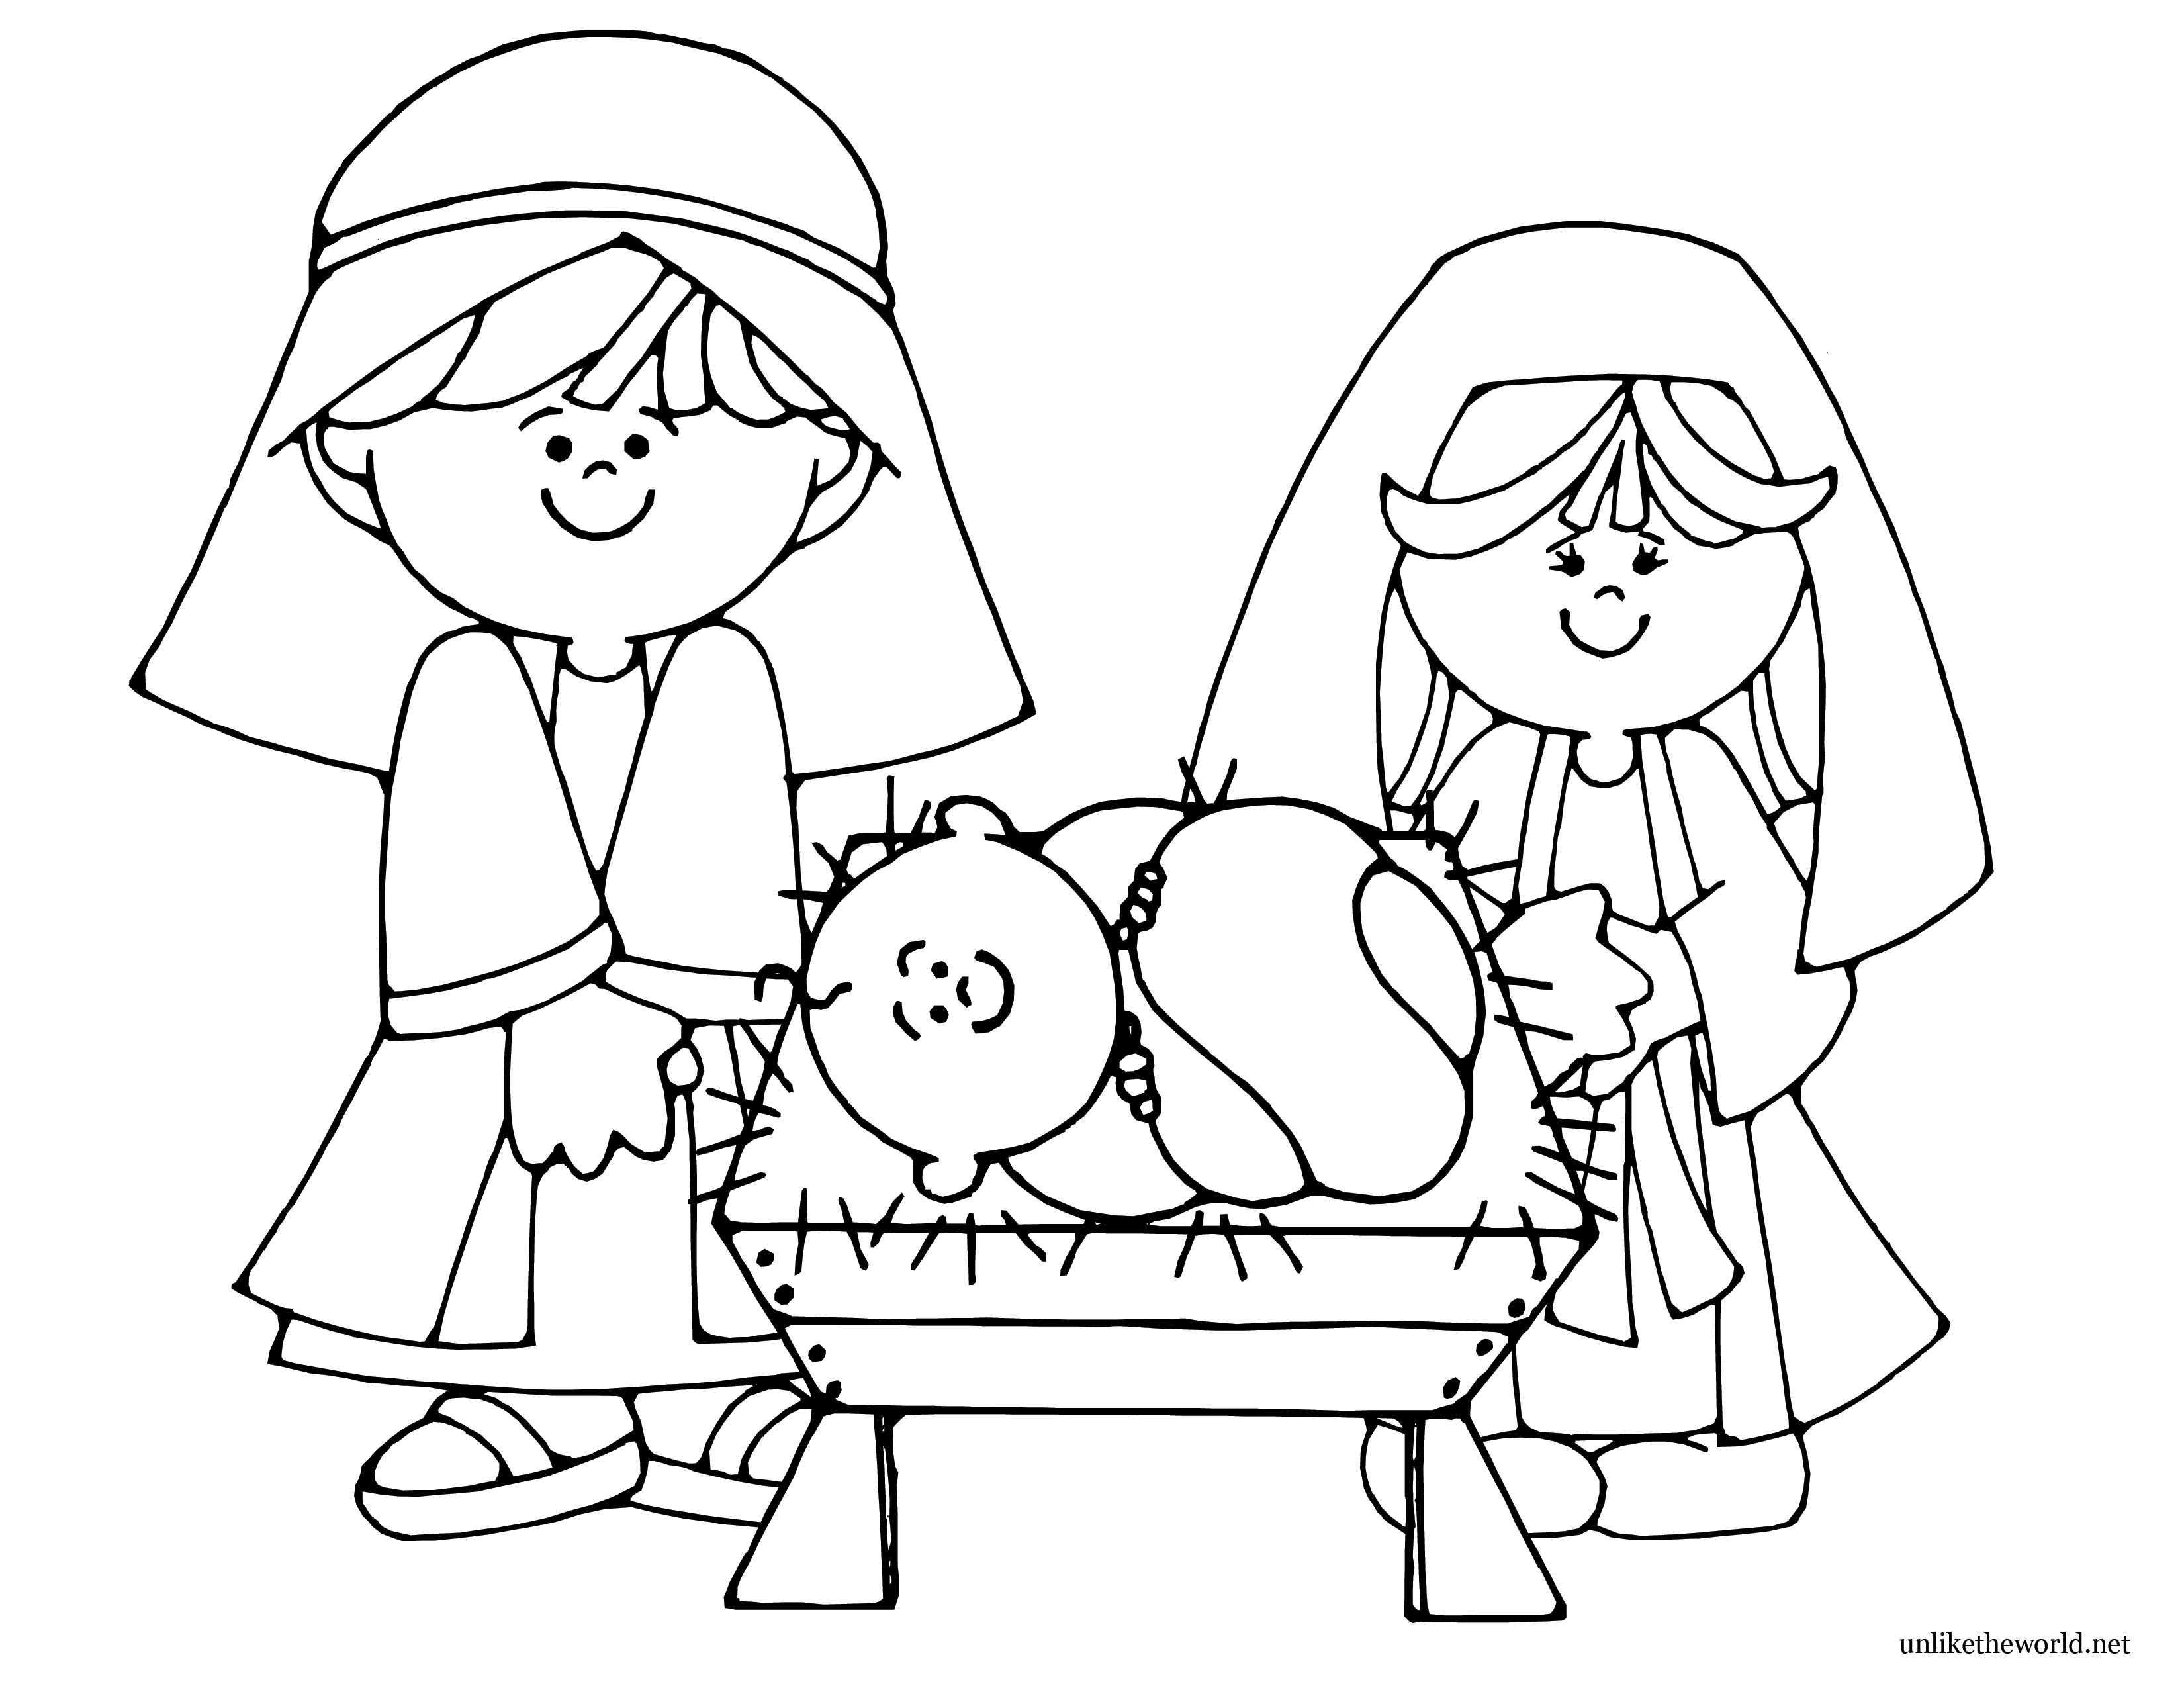 Coloring Pages ~ Thehristmas Storyoloring Pages Baby Jesus In Manger - Free Printable Christmas Baby Jesus Coloring Pages